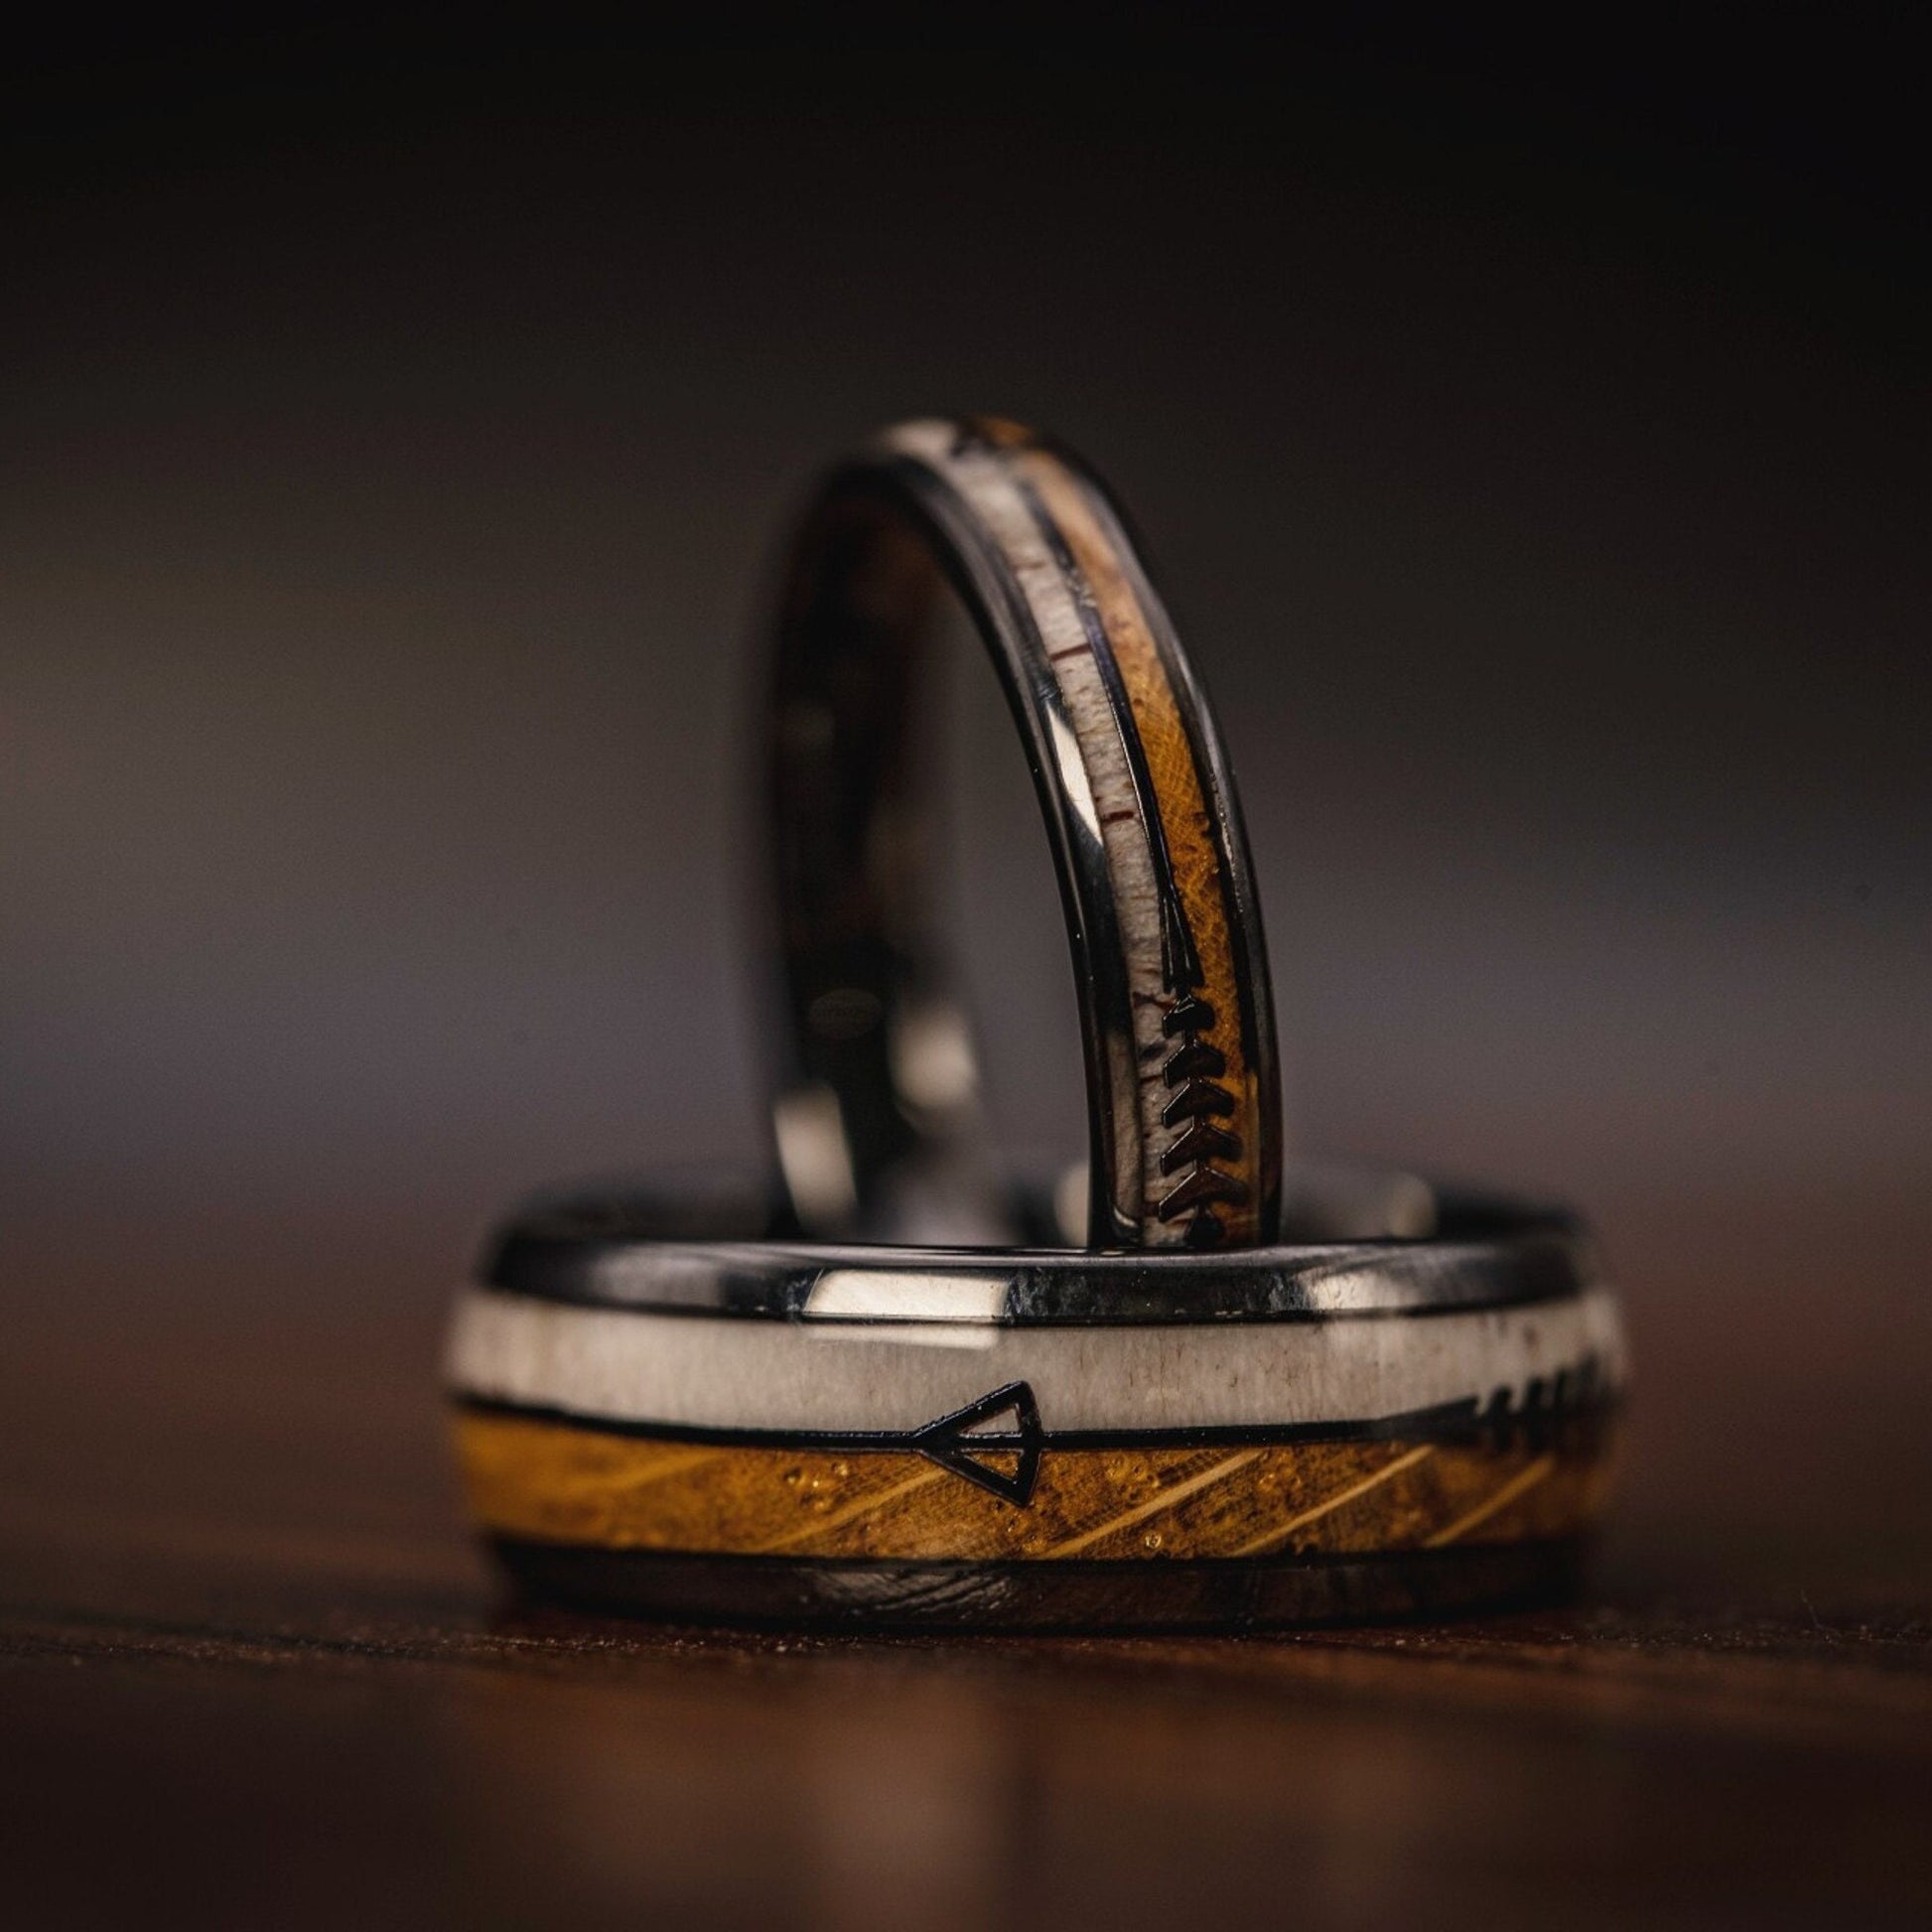 Rustic wedding band crafted from genuine deer antler and whiskey barrel wood.